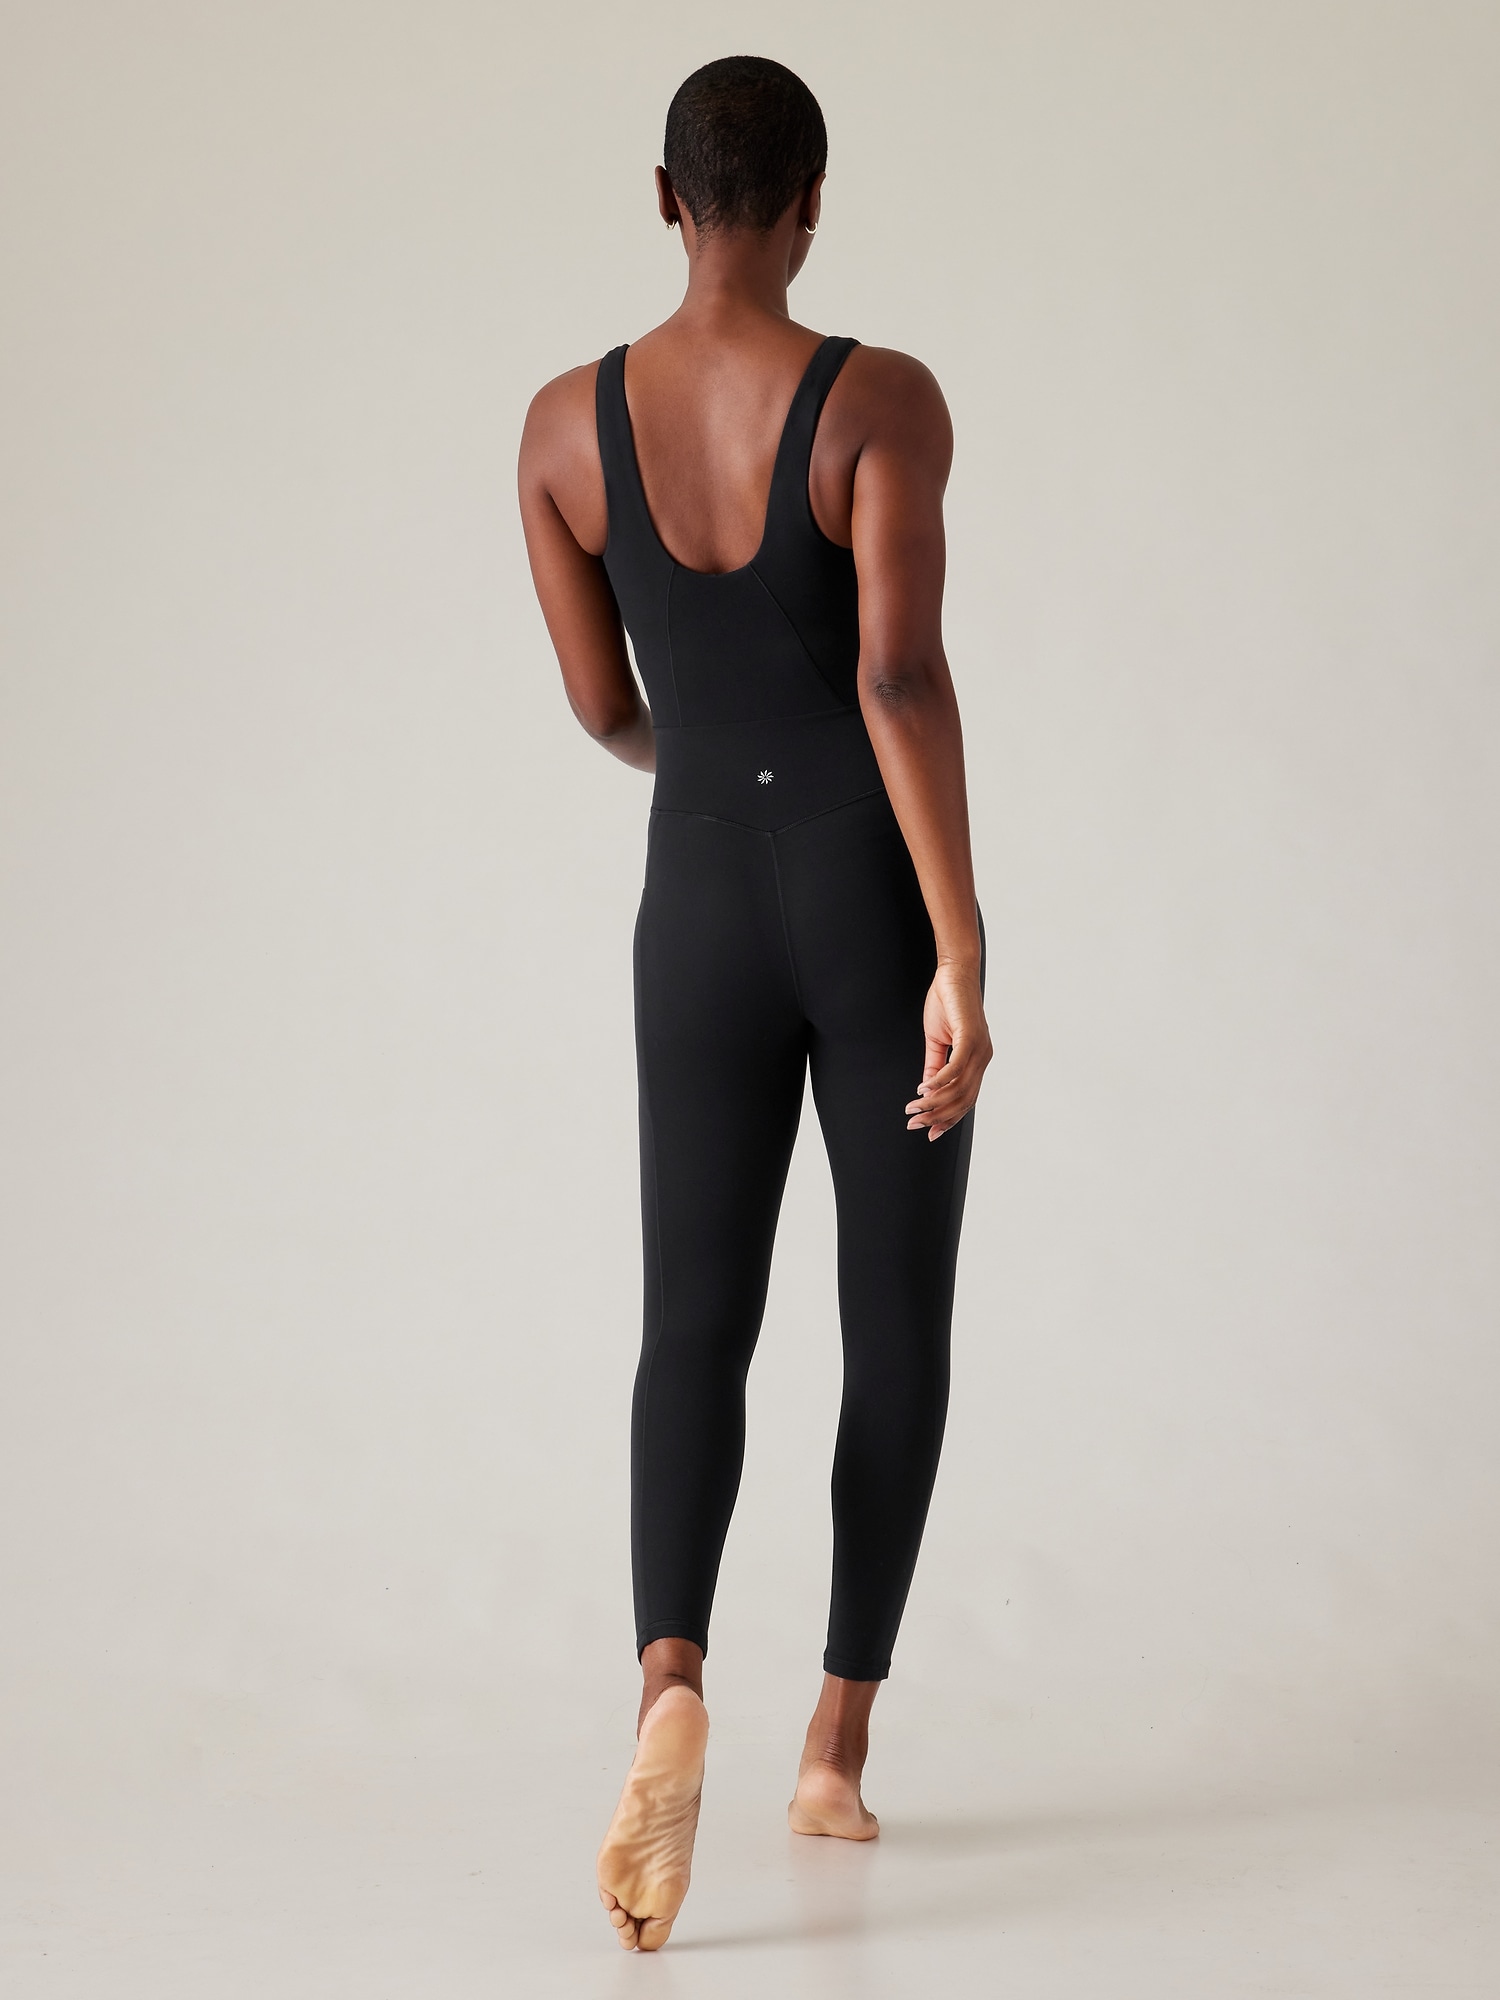 This bodysuit just hit the we made too much section at lululemon! So i